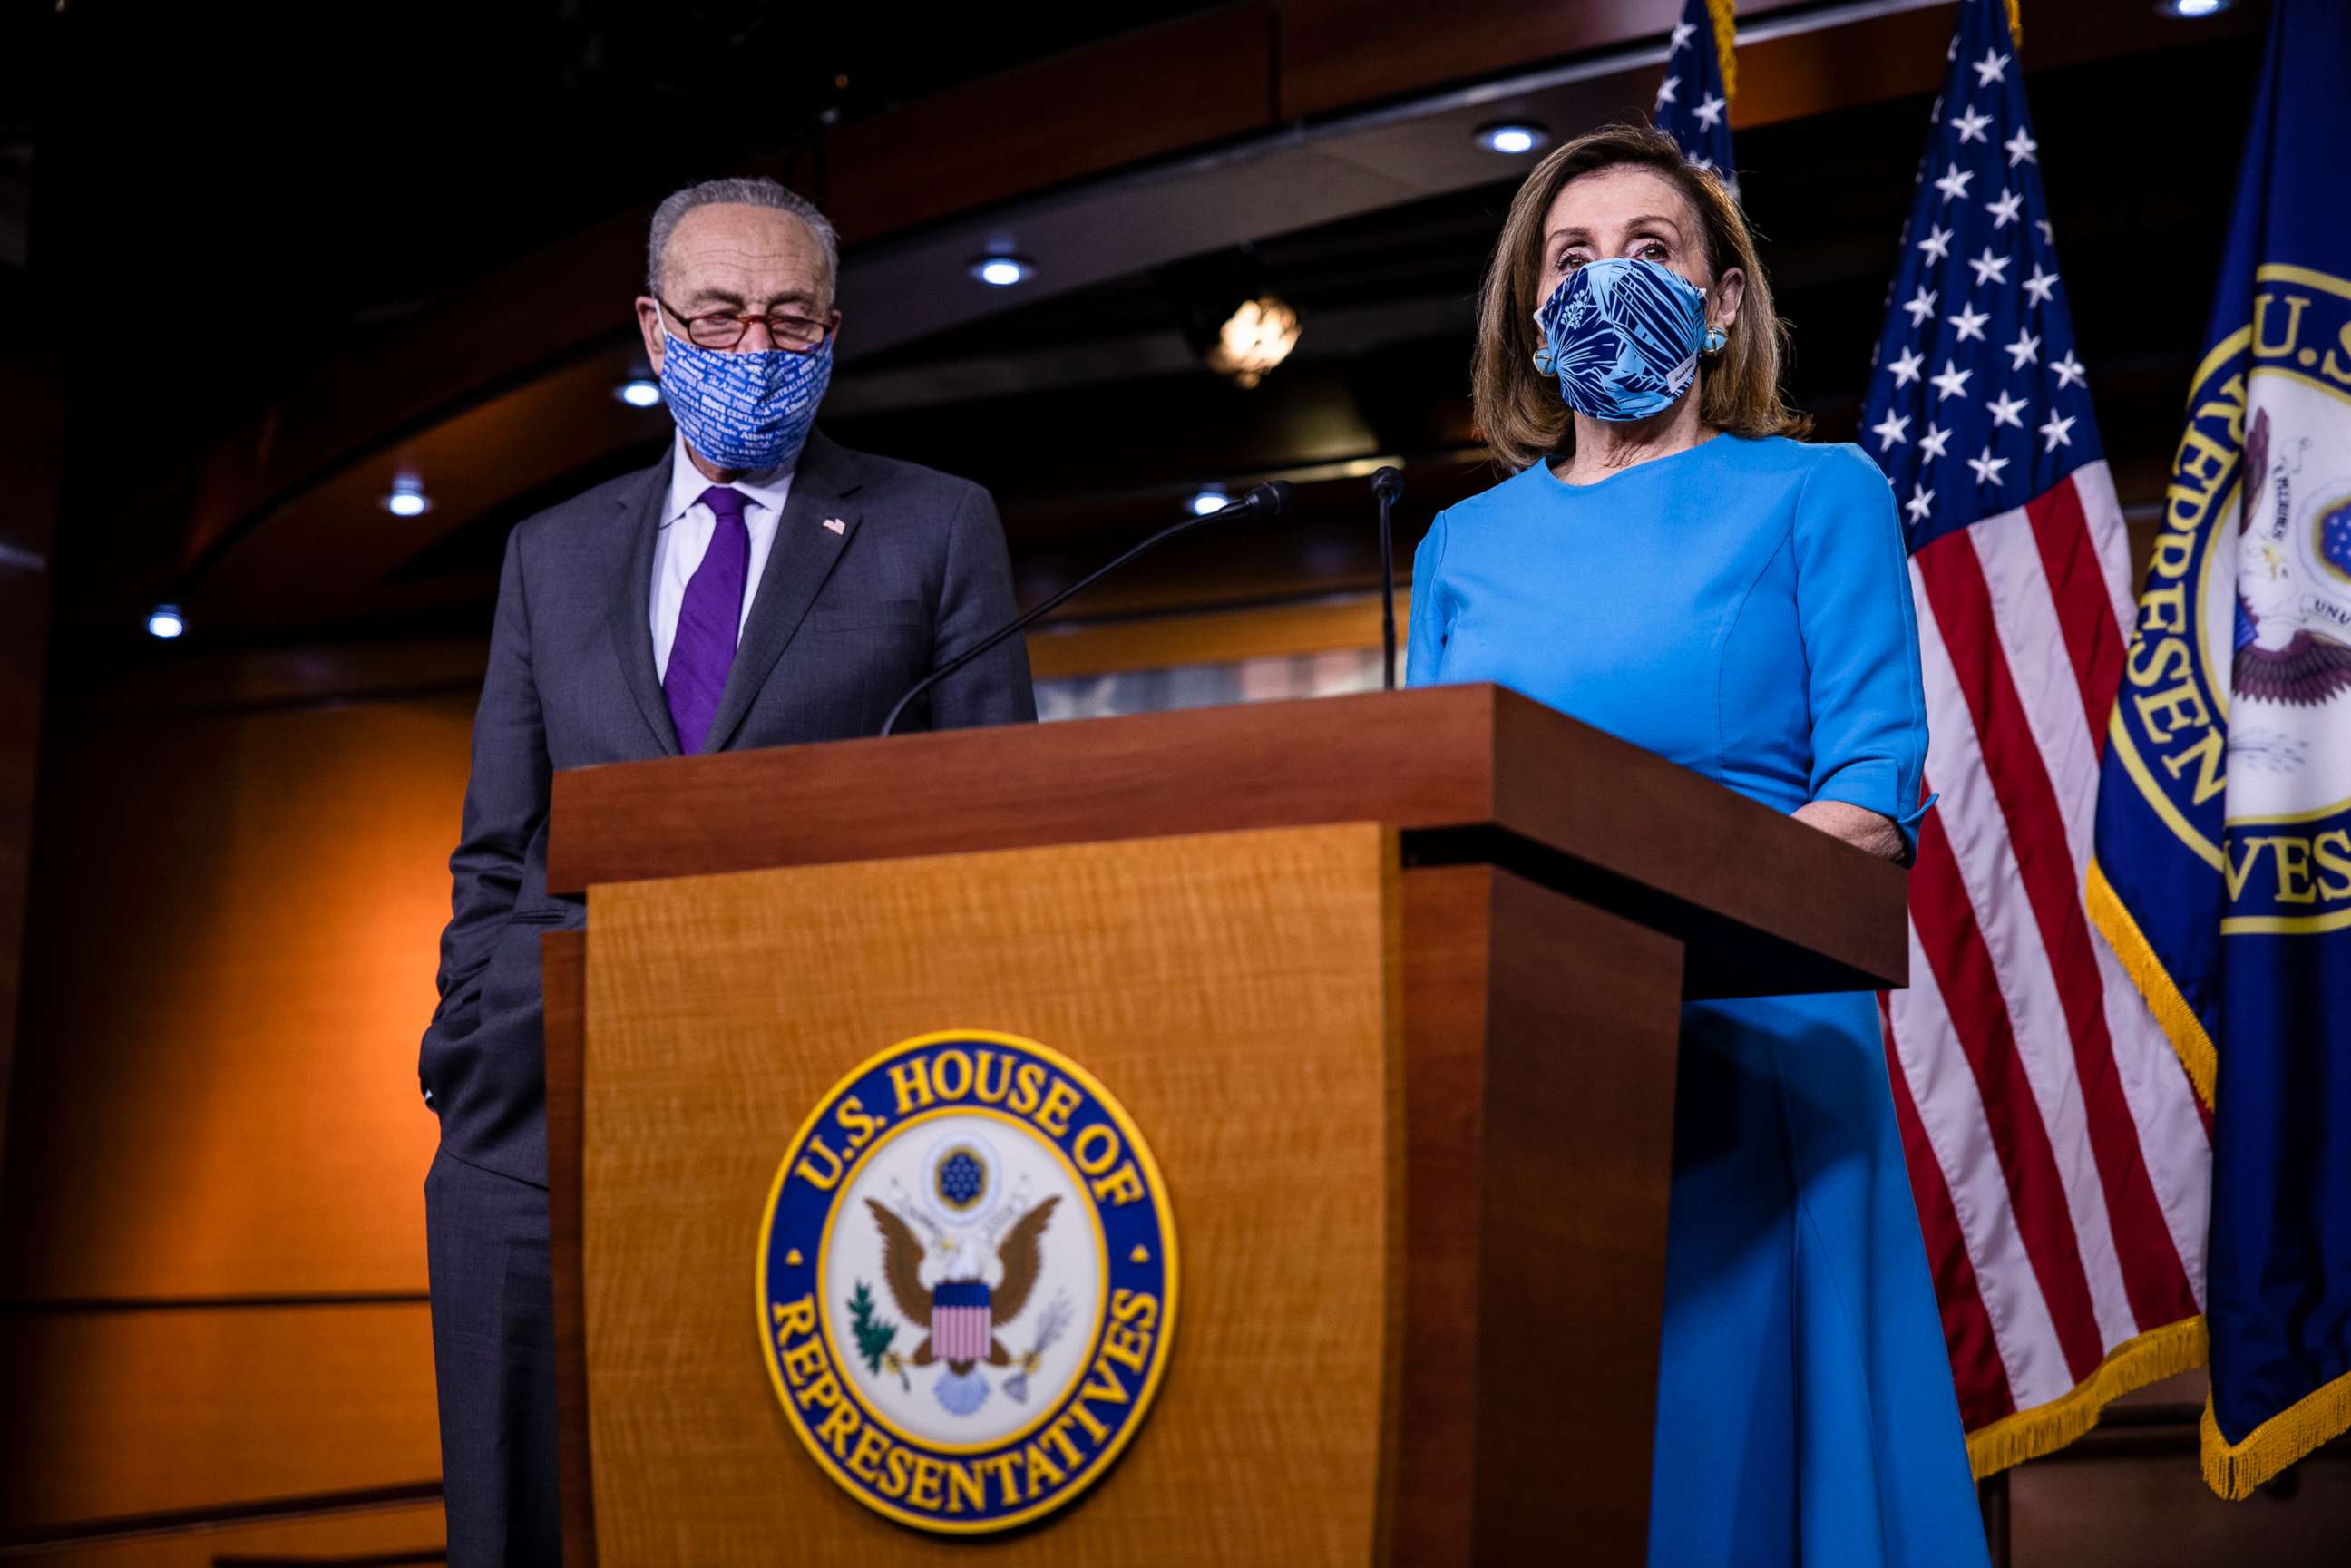 PHOTO: Speaker of the House Nancy Pelosi speaks alongside Senate Minority Leader Chuck Schumer during a joint press conference at the U.S. Capitol, Nov. 12, 2020, in Washington, DC.